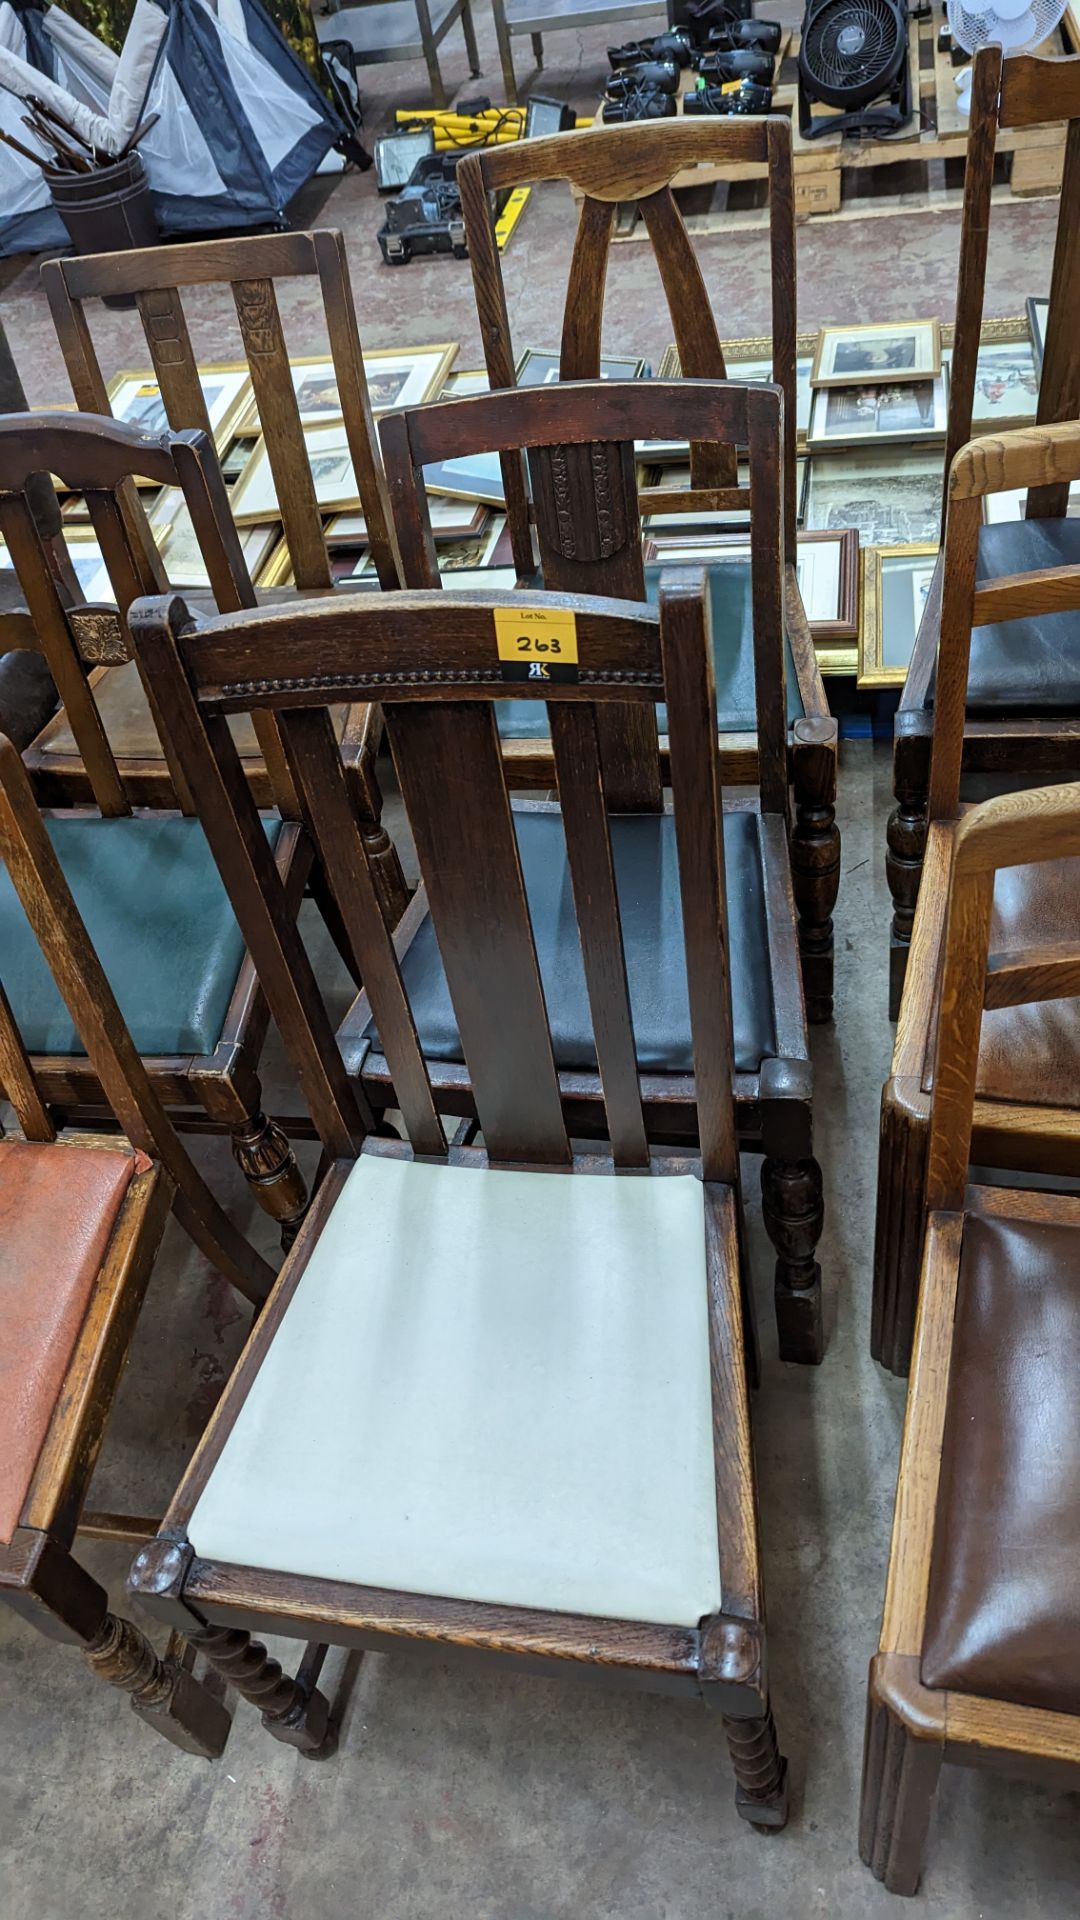 12 off assorted wooden dining chairs - Image 3 of 7